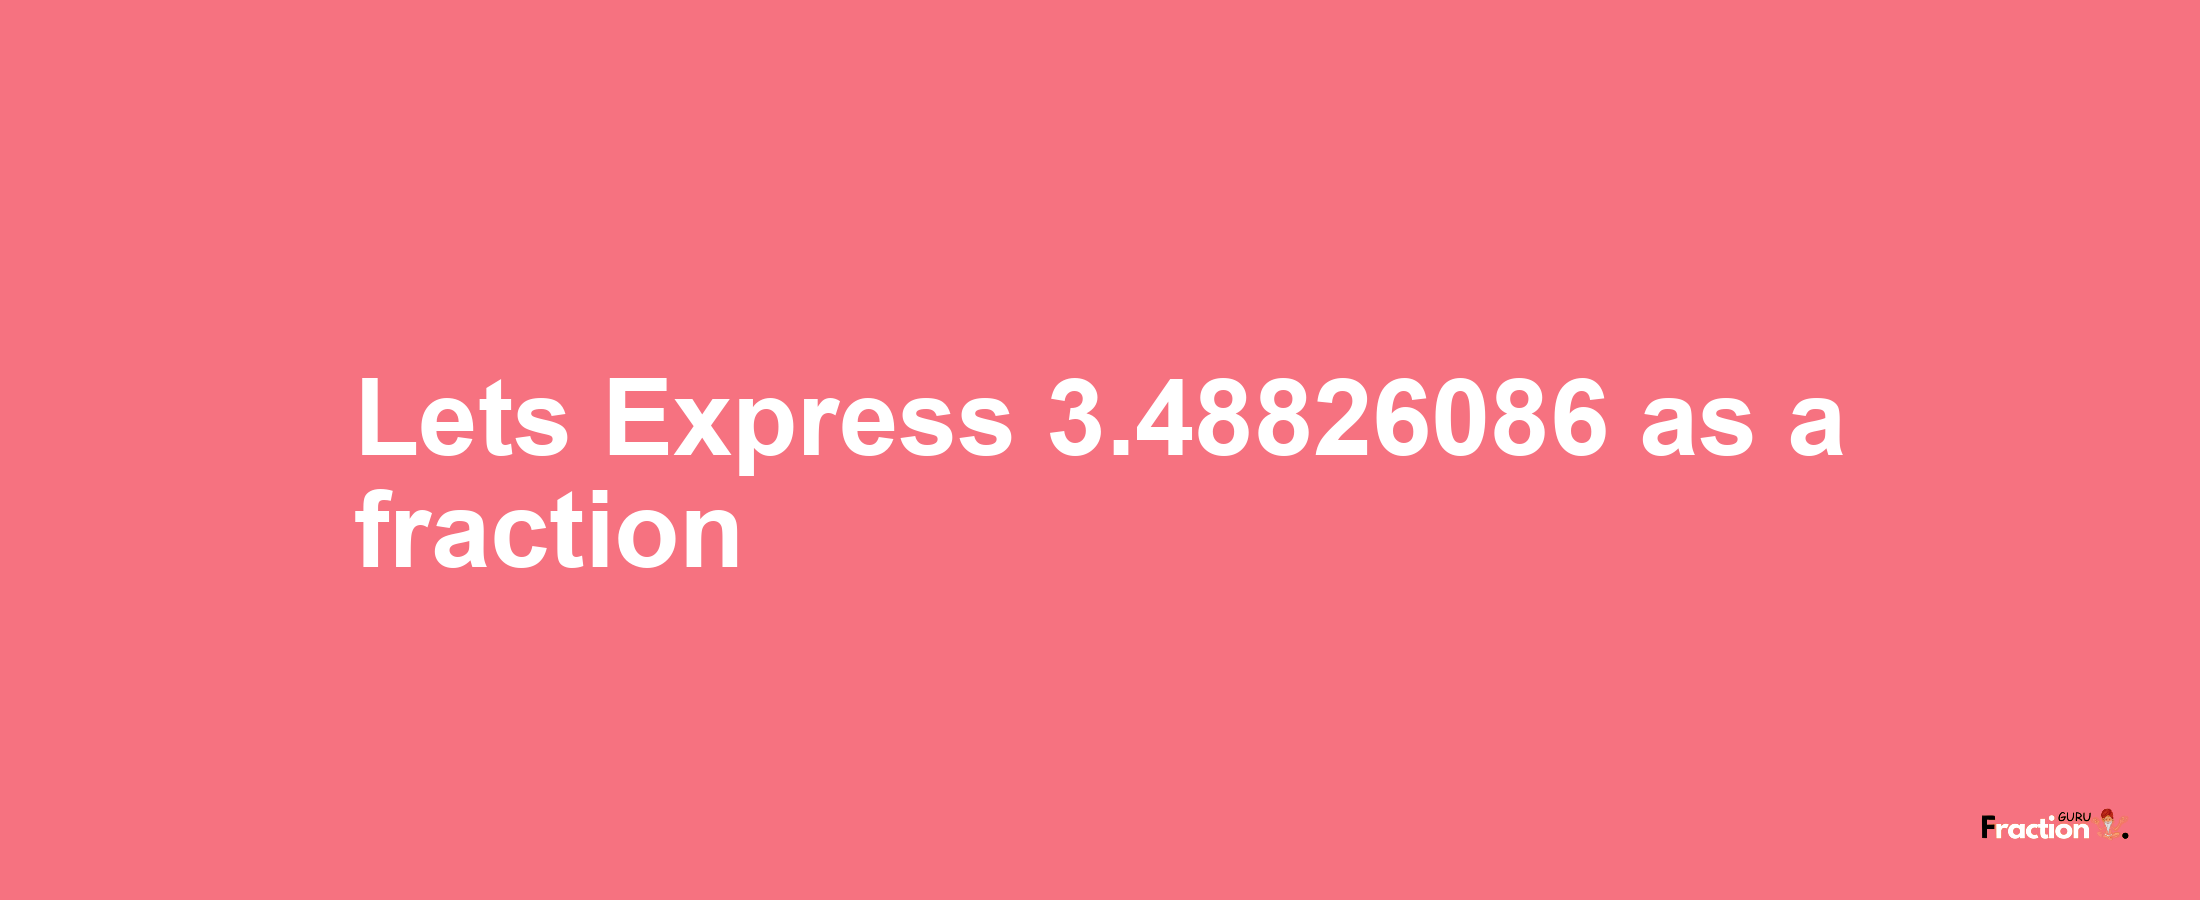 Lets Express 3.48826086 as afraction